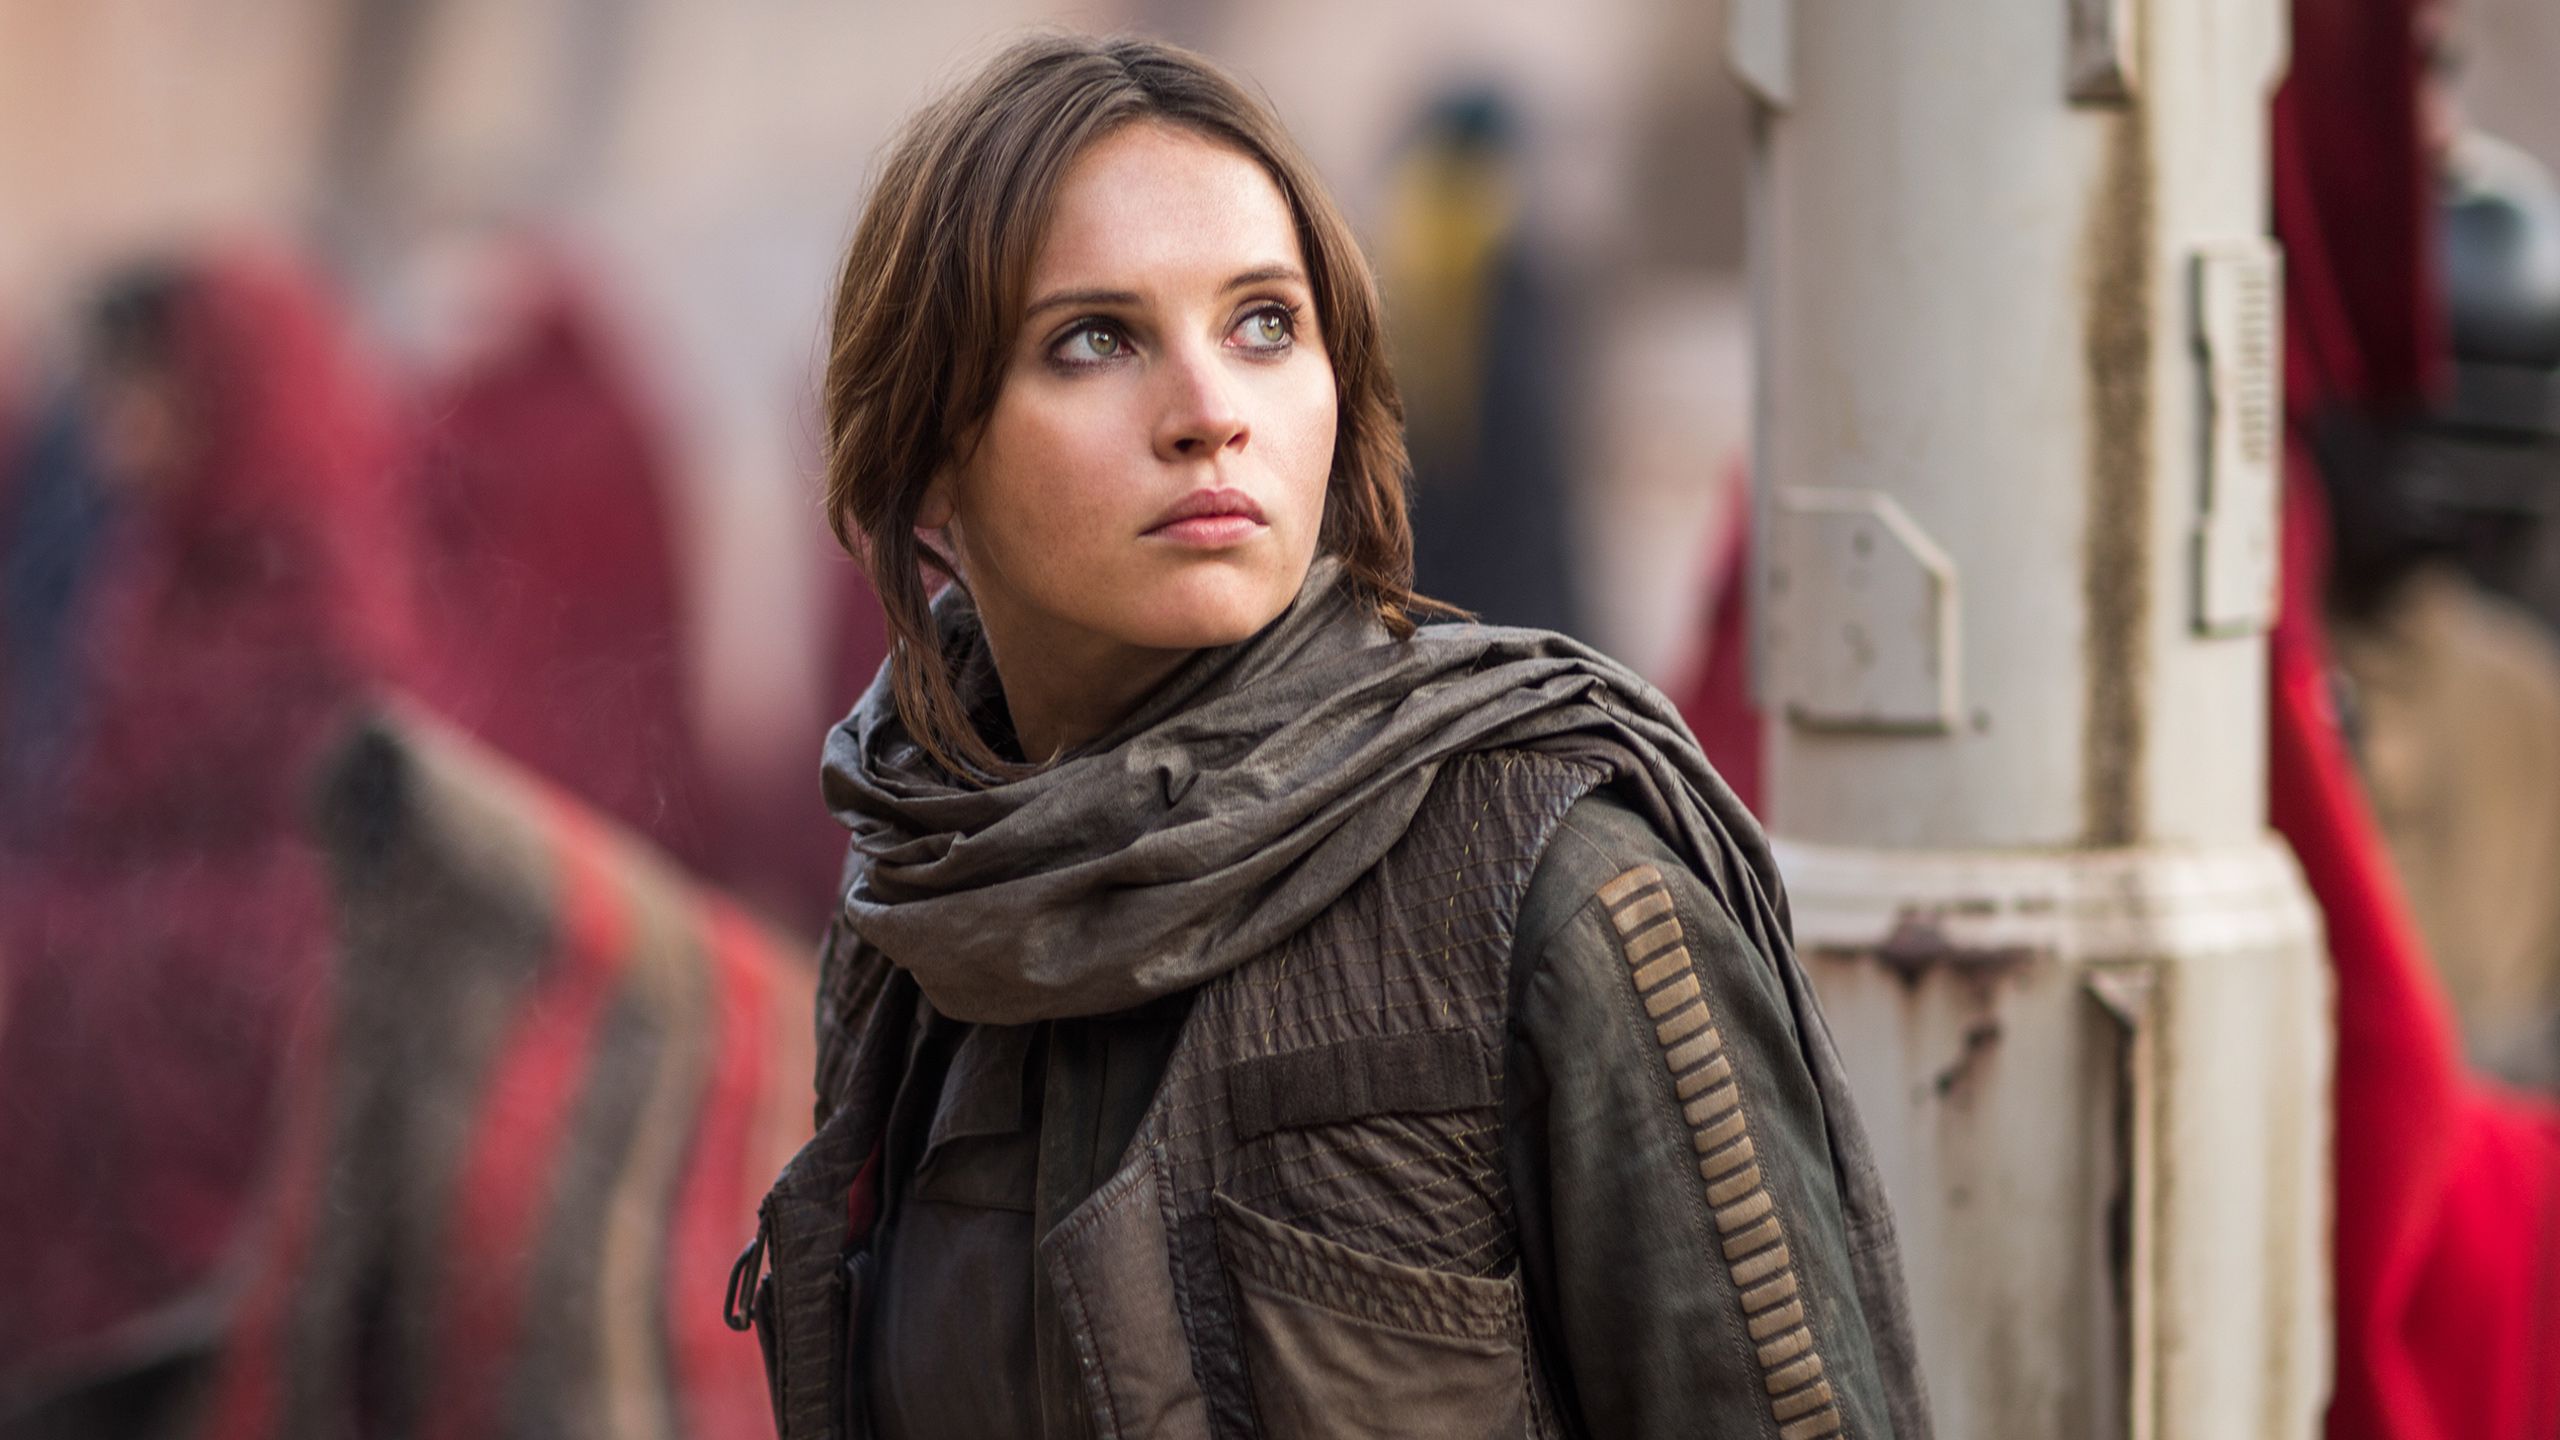 Felicity Jones As Jyn Erso In Rogue One Star Wars, HD Movies, 4k Wallpaper, Image, Background, Photo and Picture